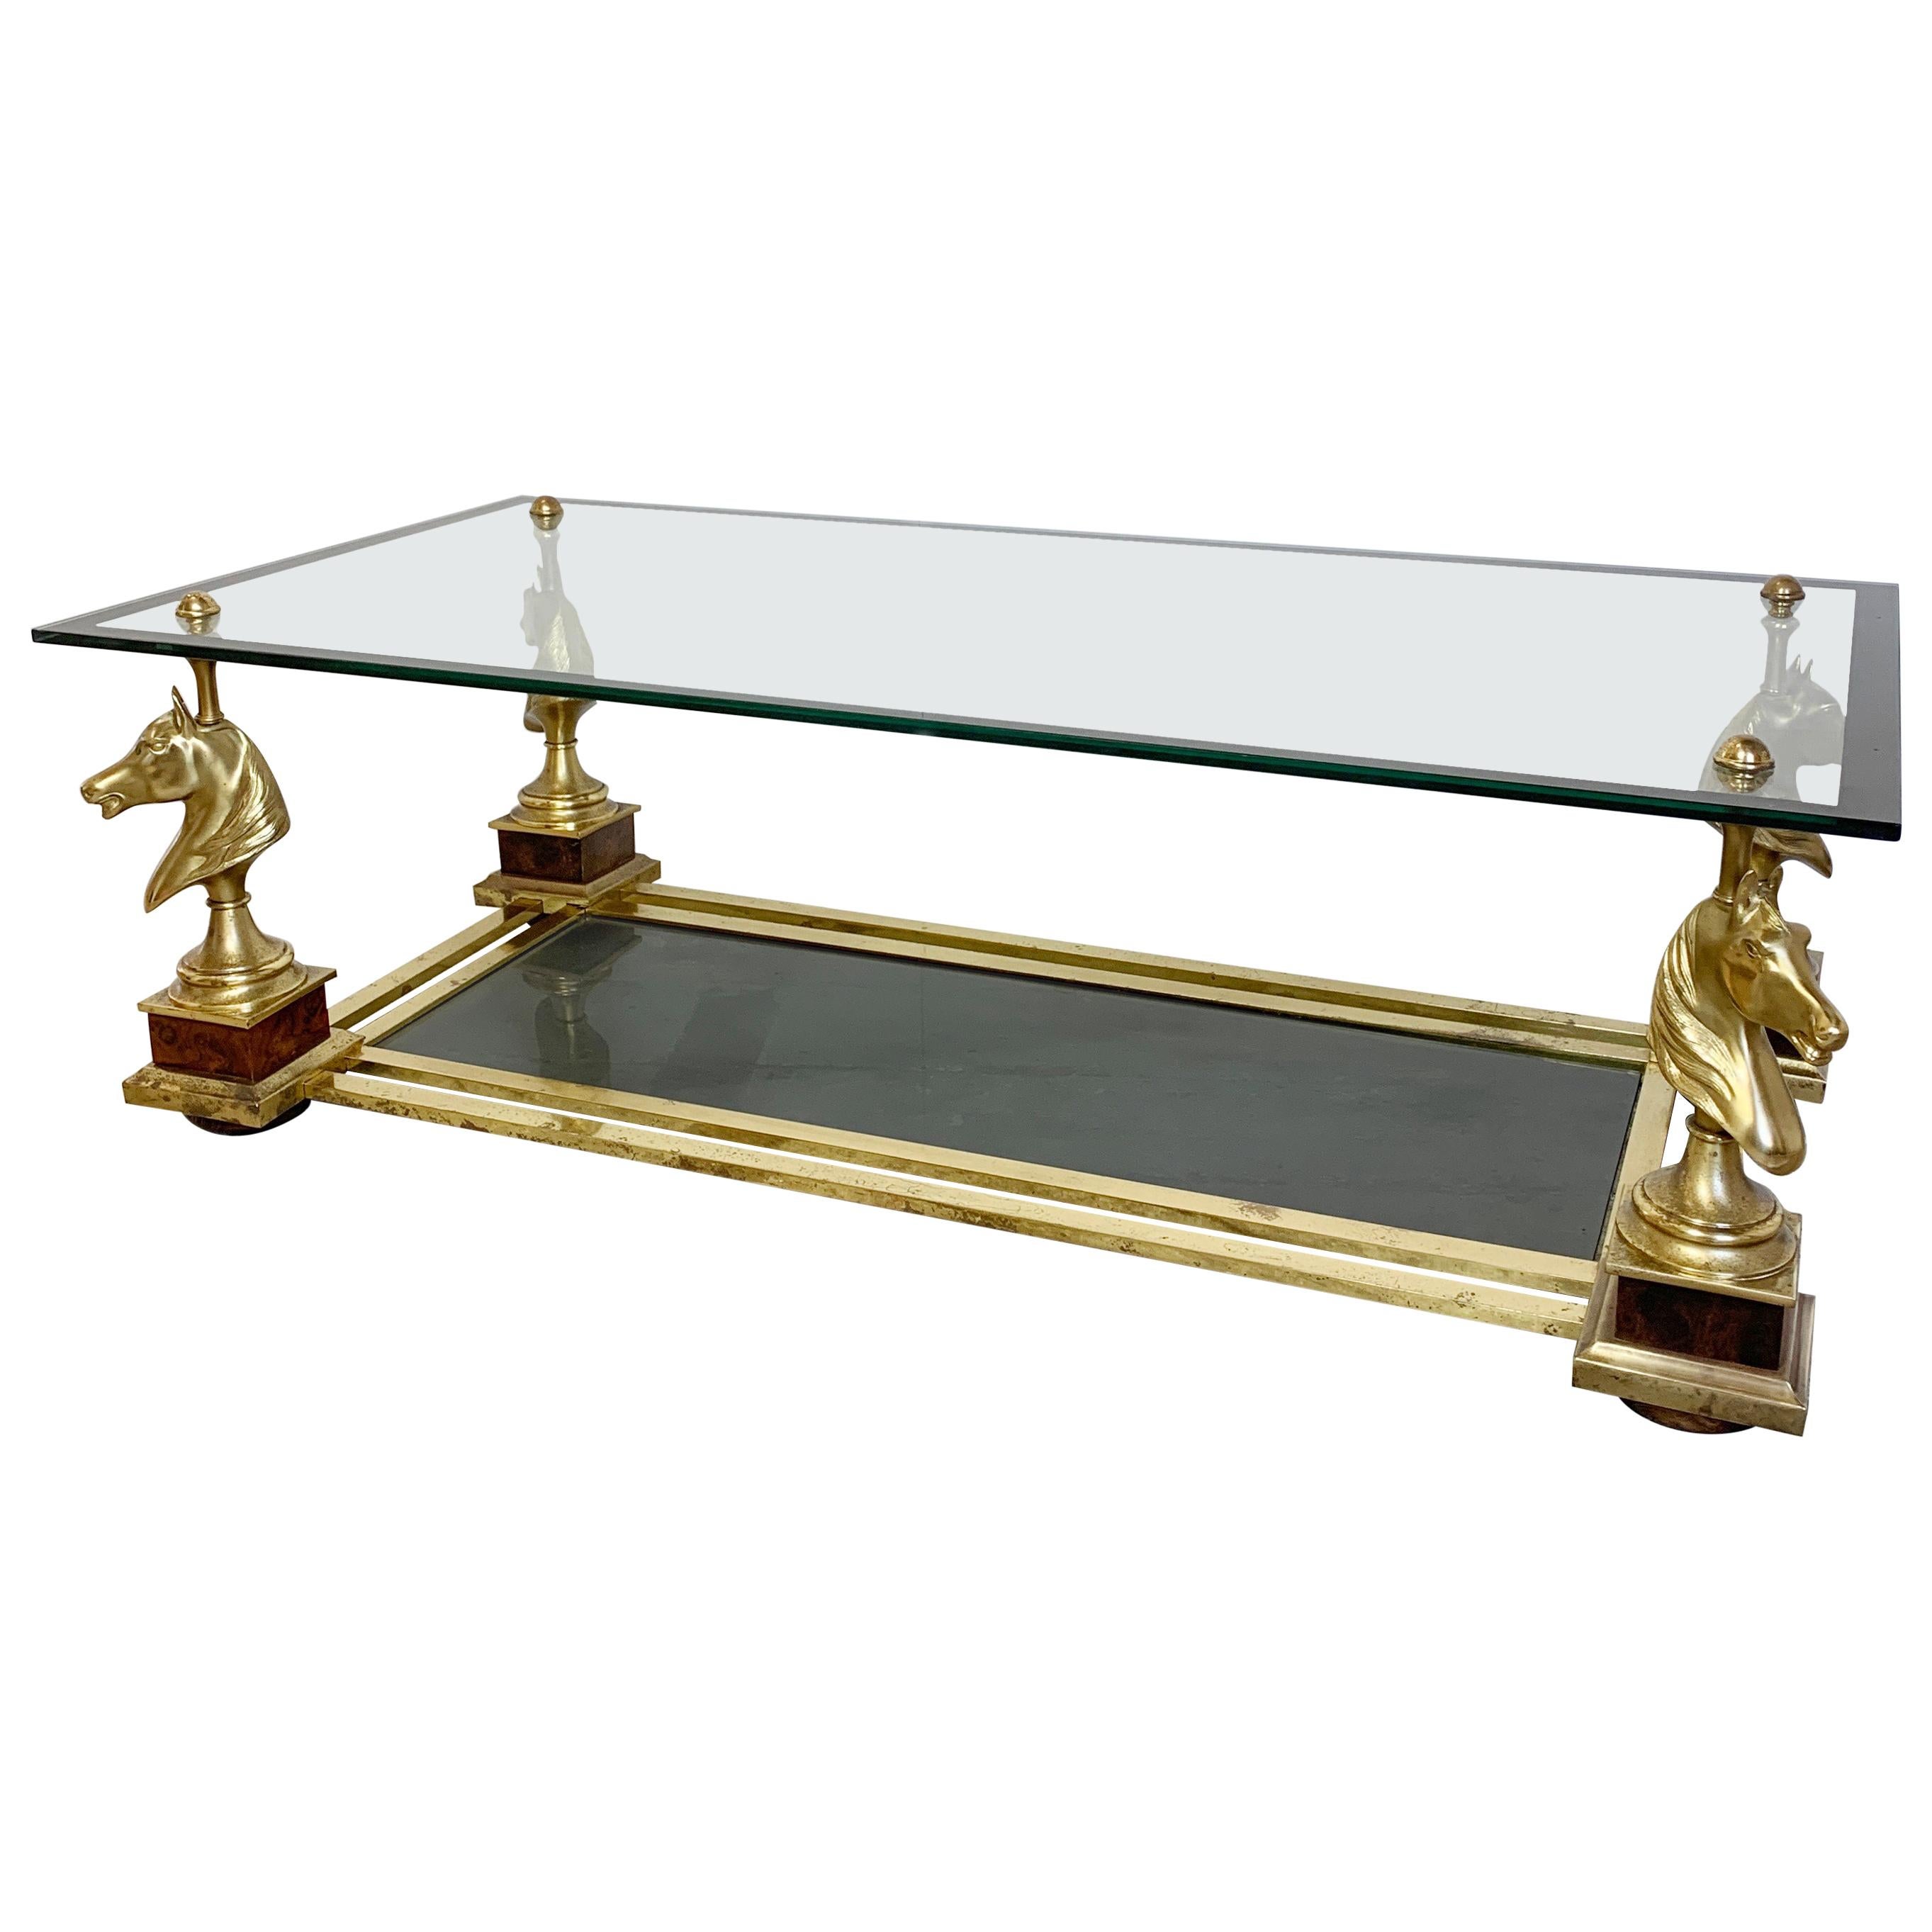 Maison Charles 'Cheval' Horse Head Coffee Table